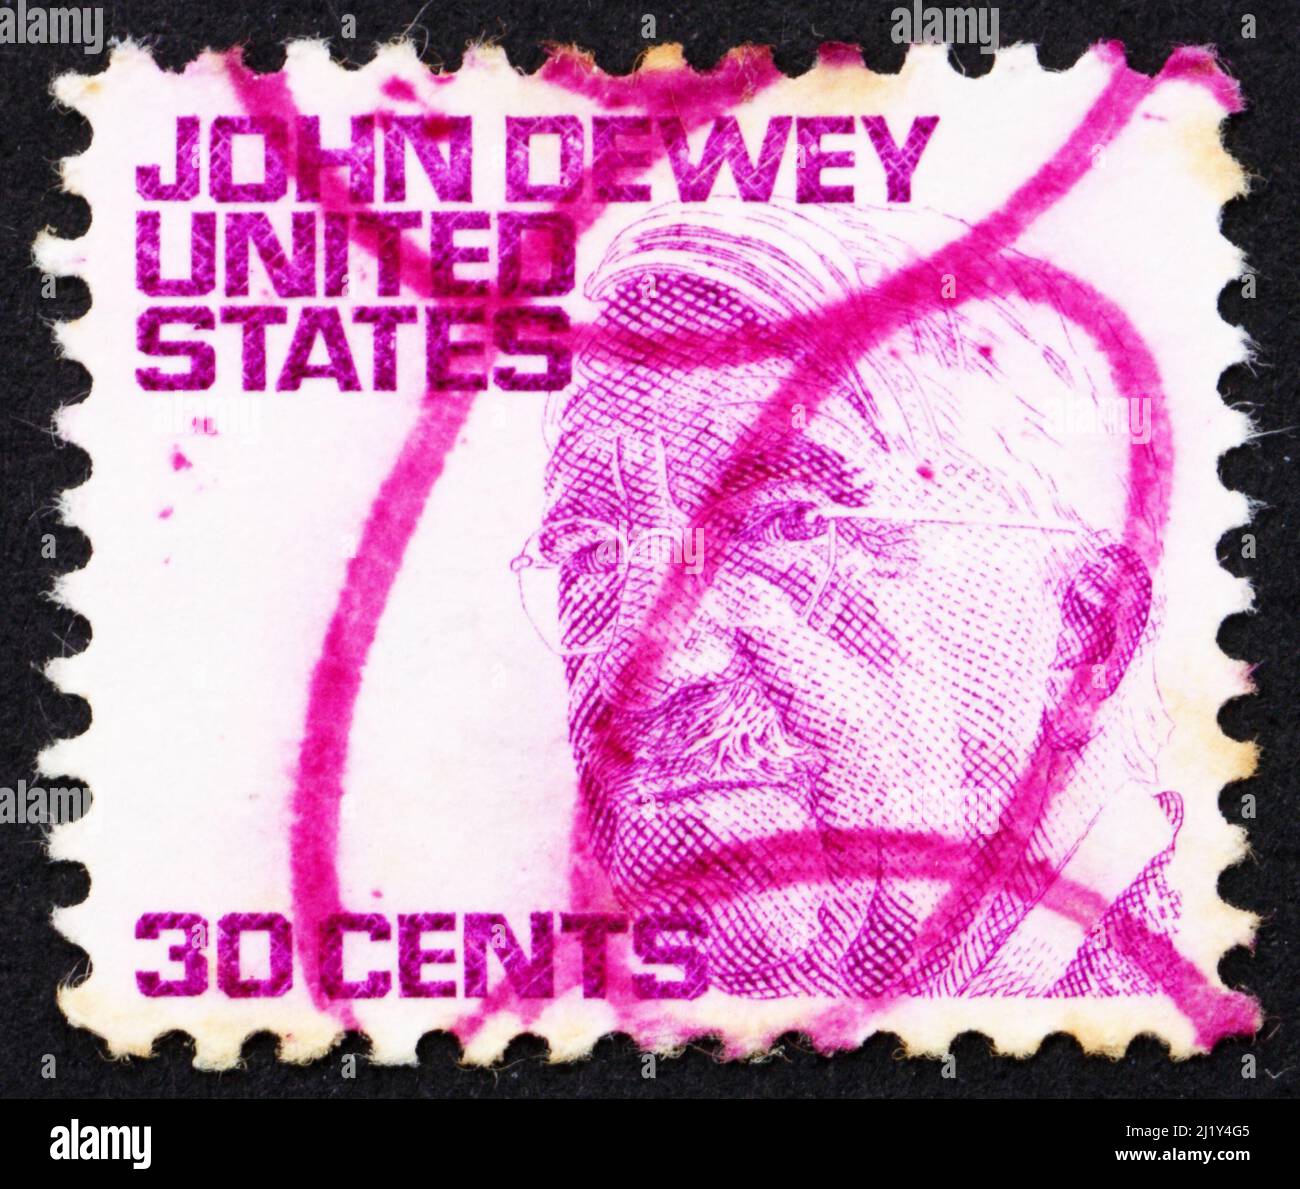 UNITED STATES OF AMERICA - CIRCA 1968: a stamp printed in the United States of America shows John Dewey, philosopher, psychologist and educational ref Stock Photo